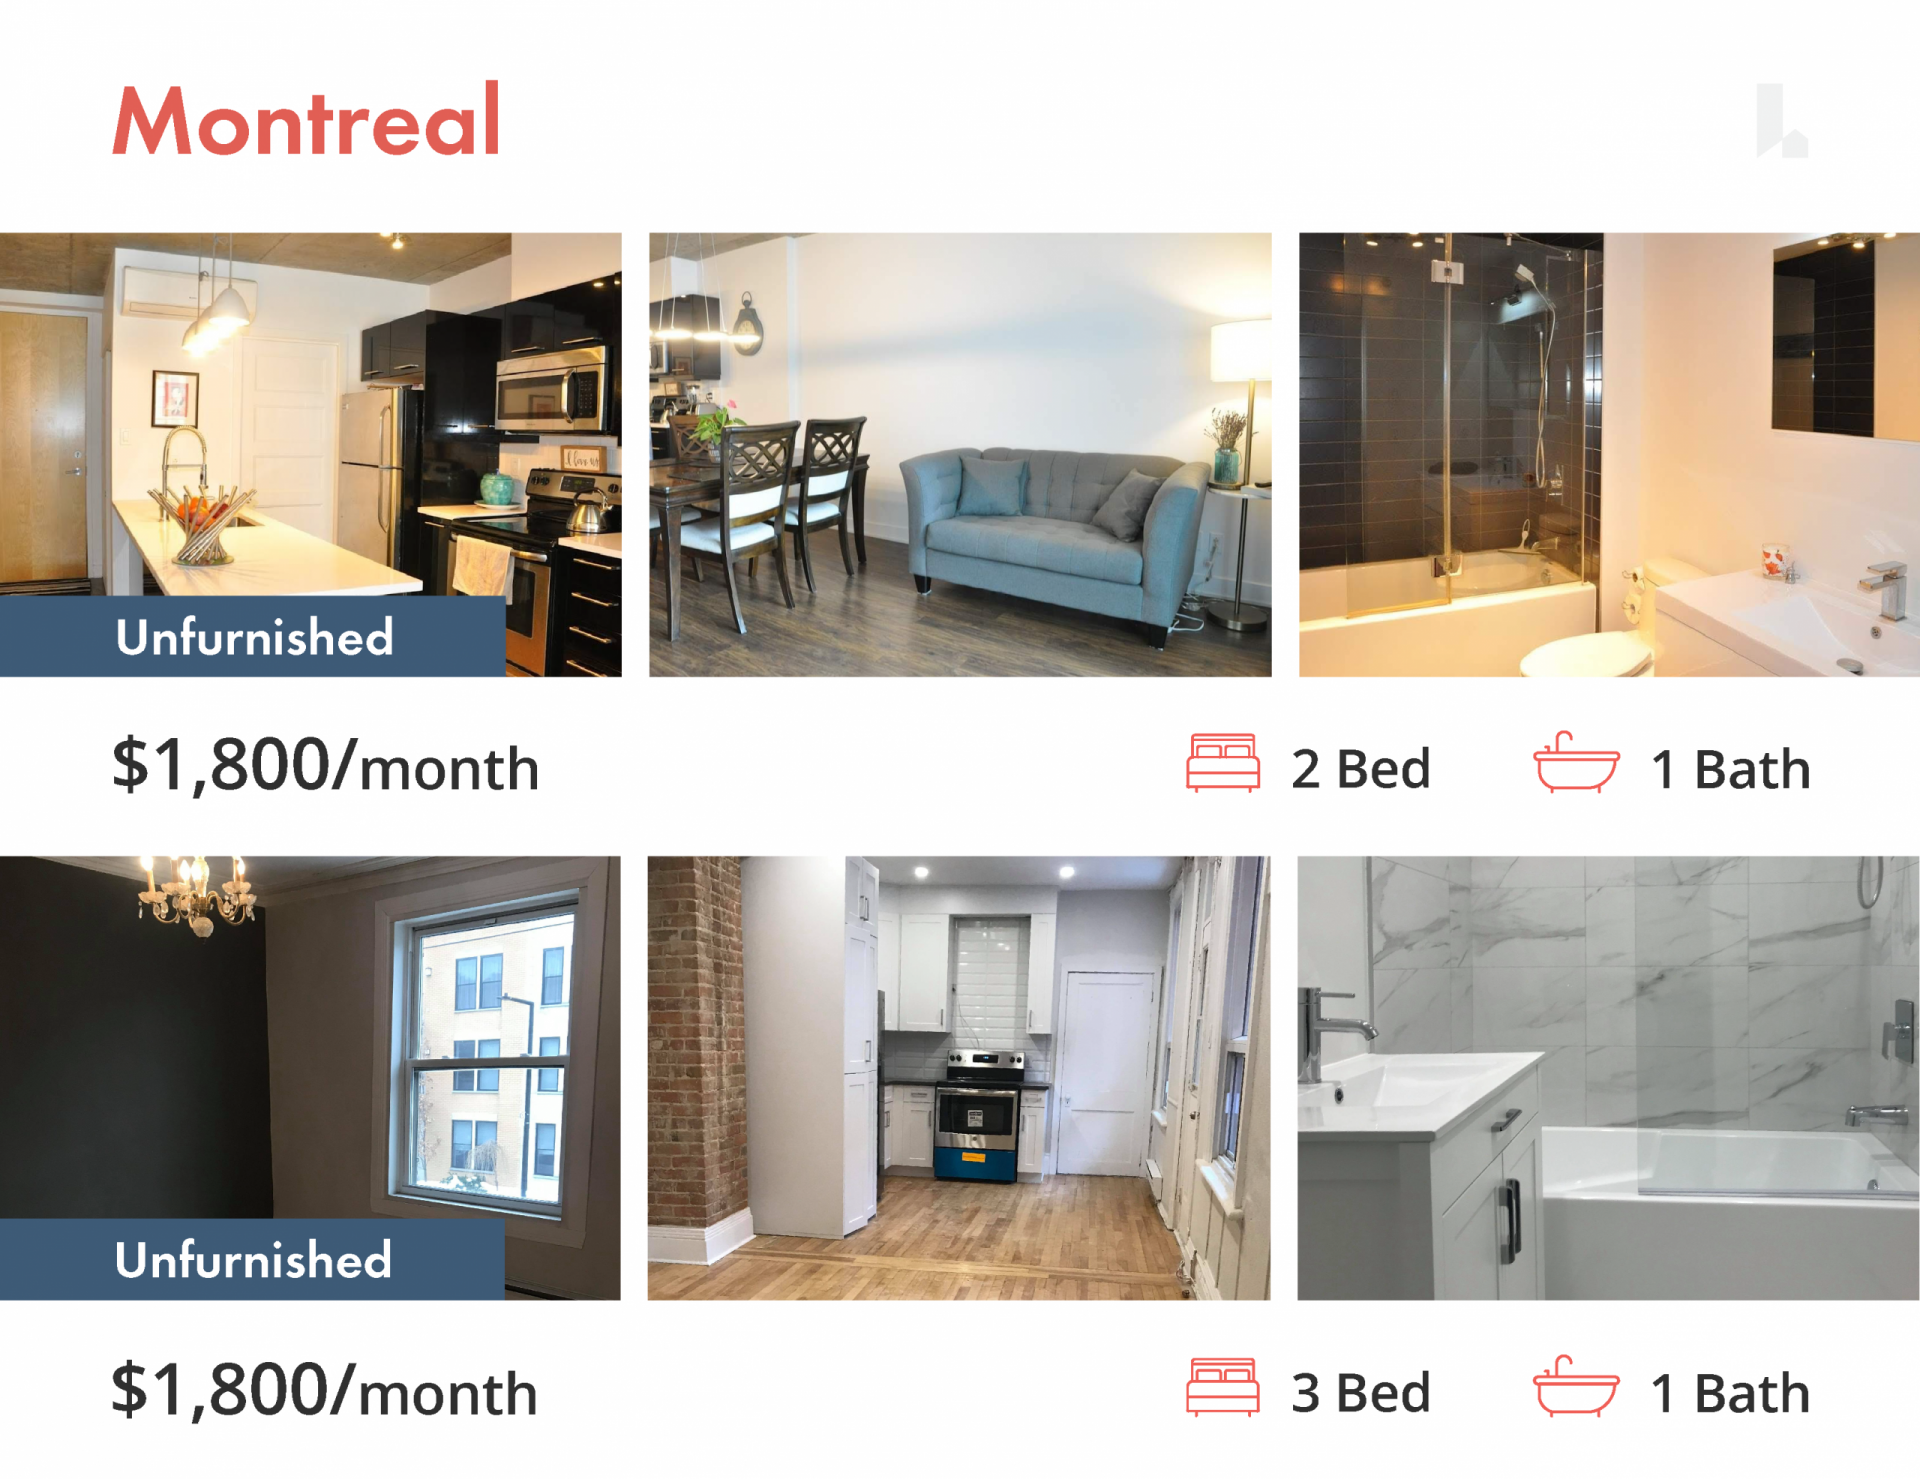 Montreal Apartment Rentals For $1800 Or Less